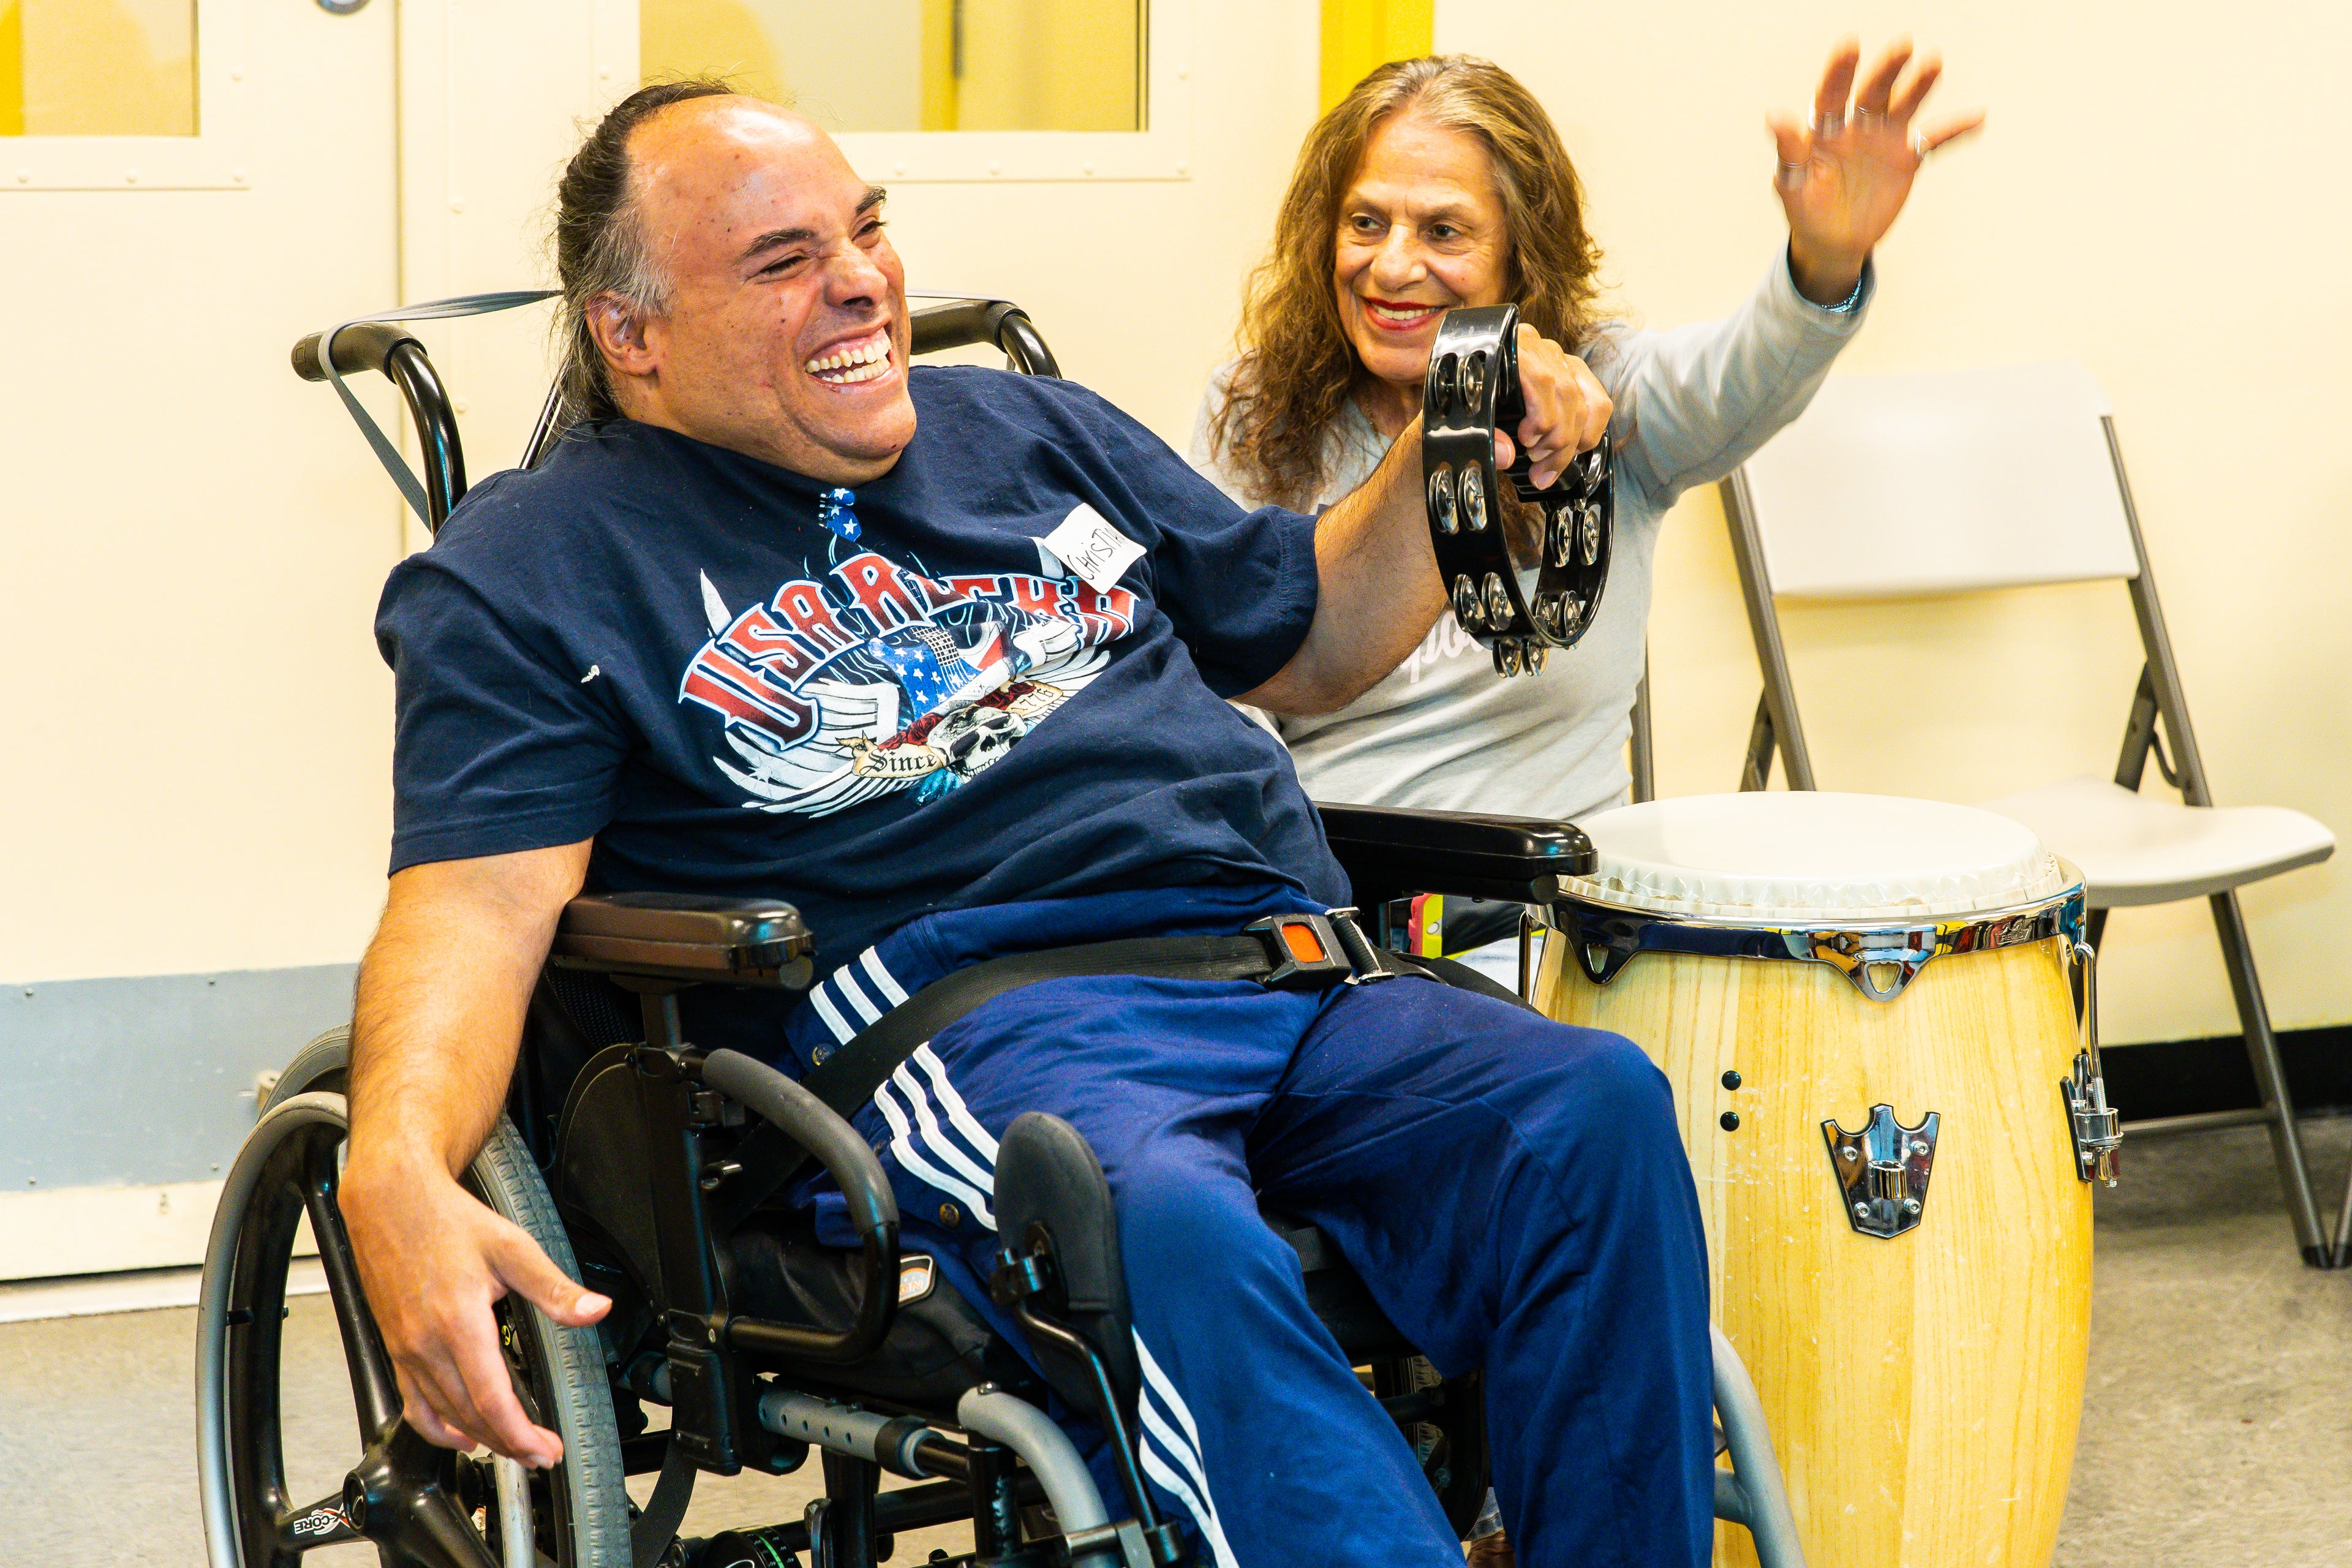 Image of a member at DMF playing the tamborine next to an older woman. He is using a wheelchair, and smiling broadly. 